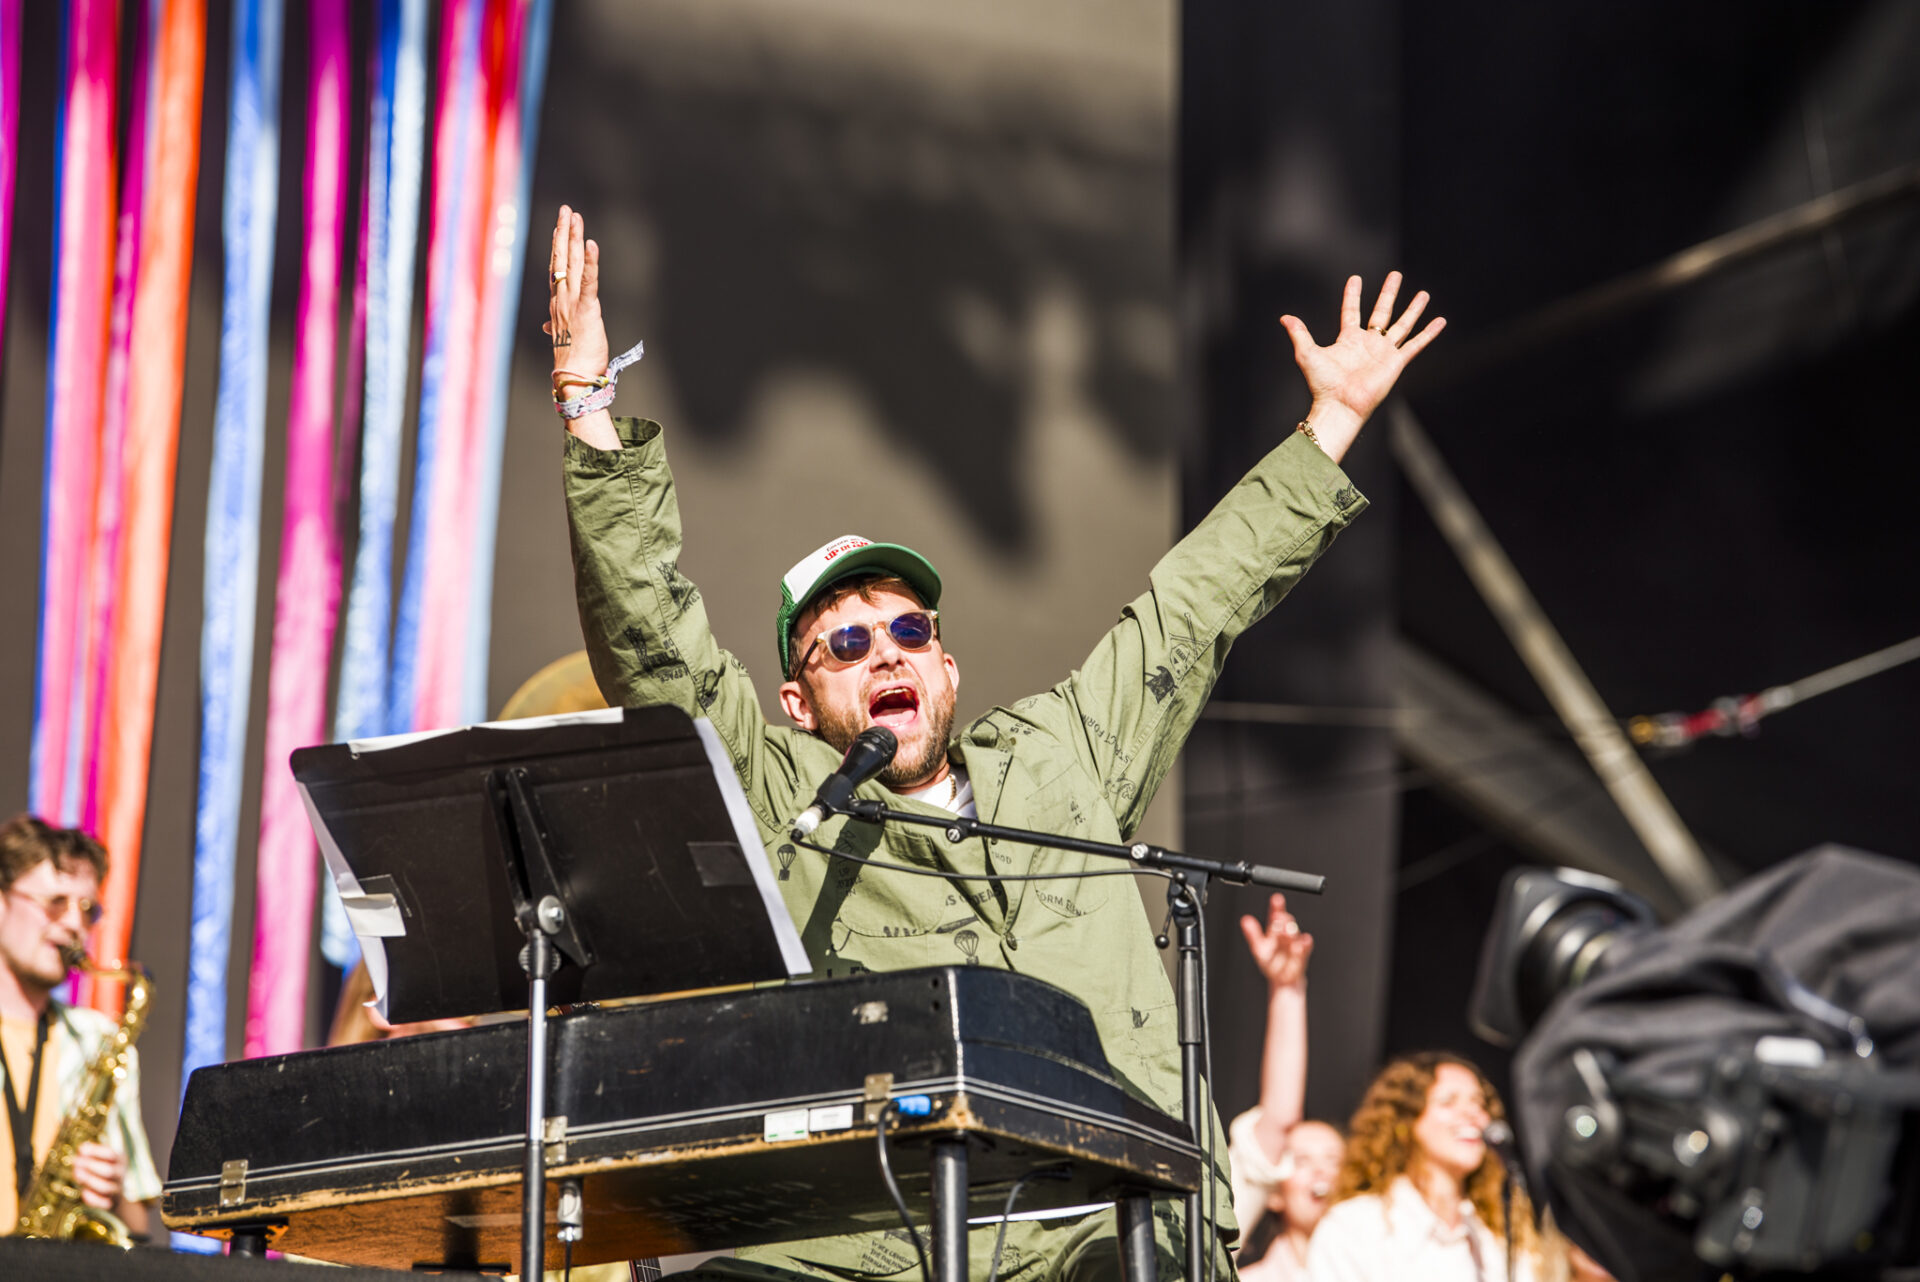 Damon Albarn calls on audience to vote during Bombay Bicycle Club performance